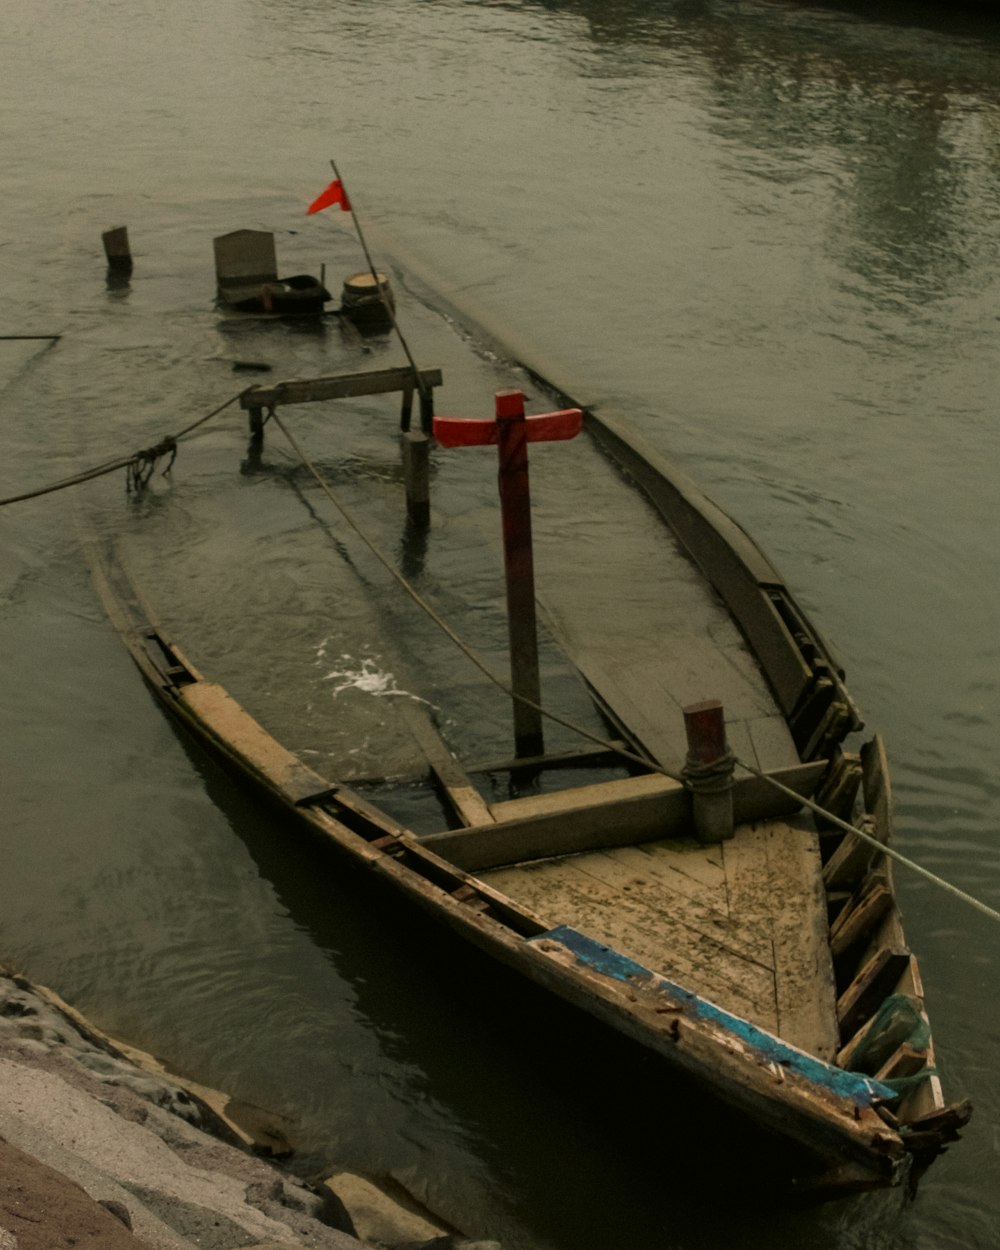 a small boat tied to a dock in a body of water